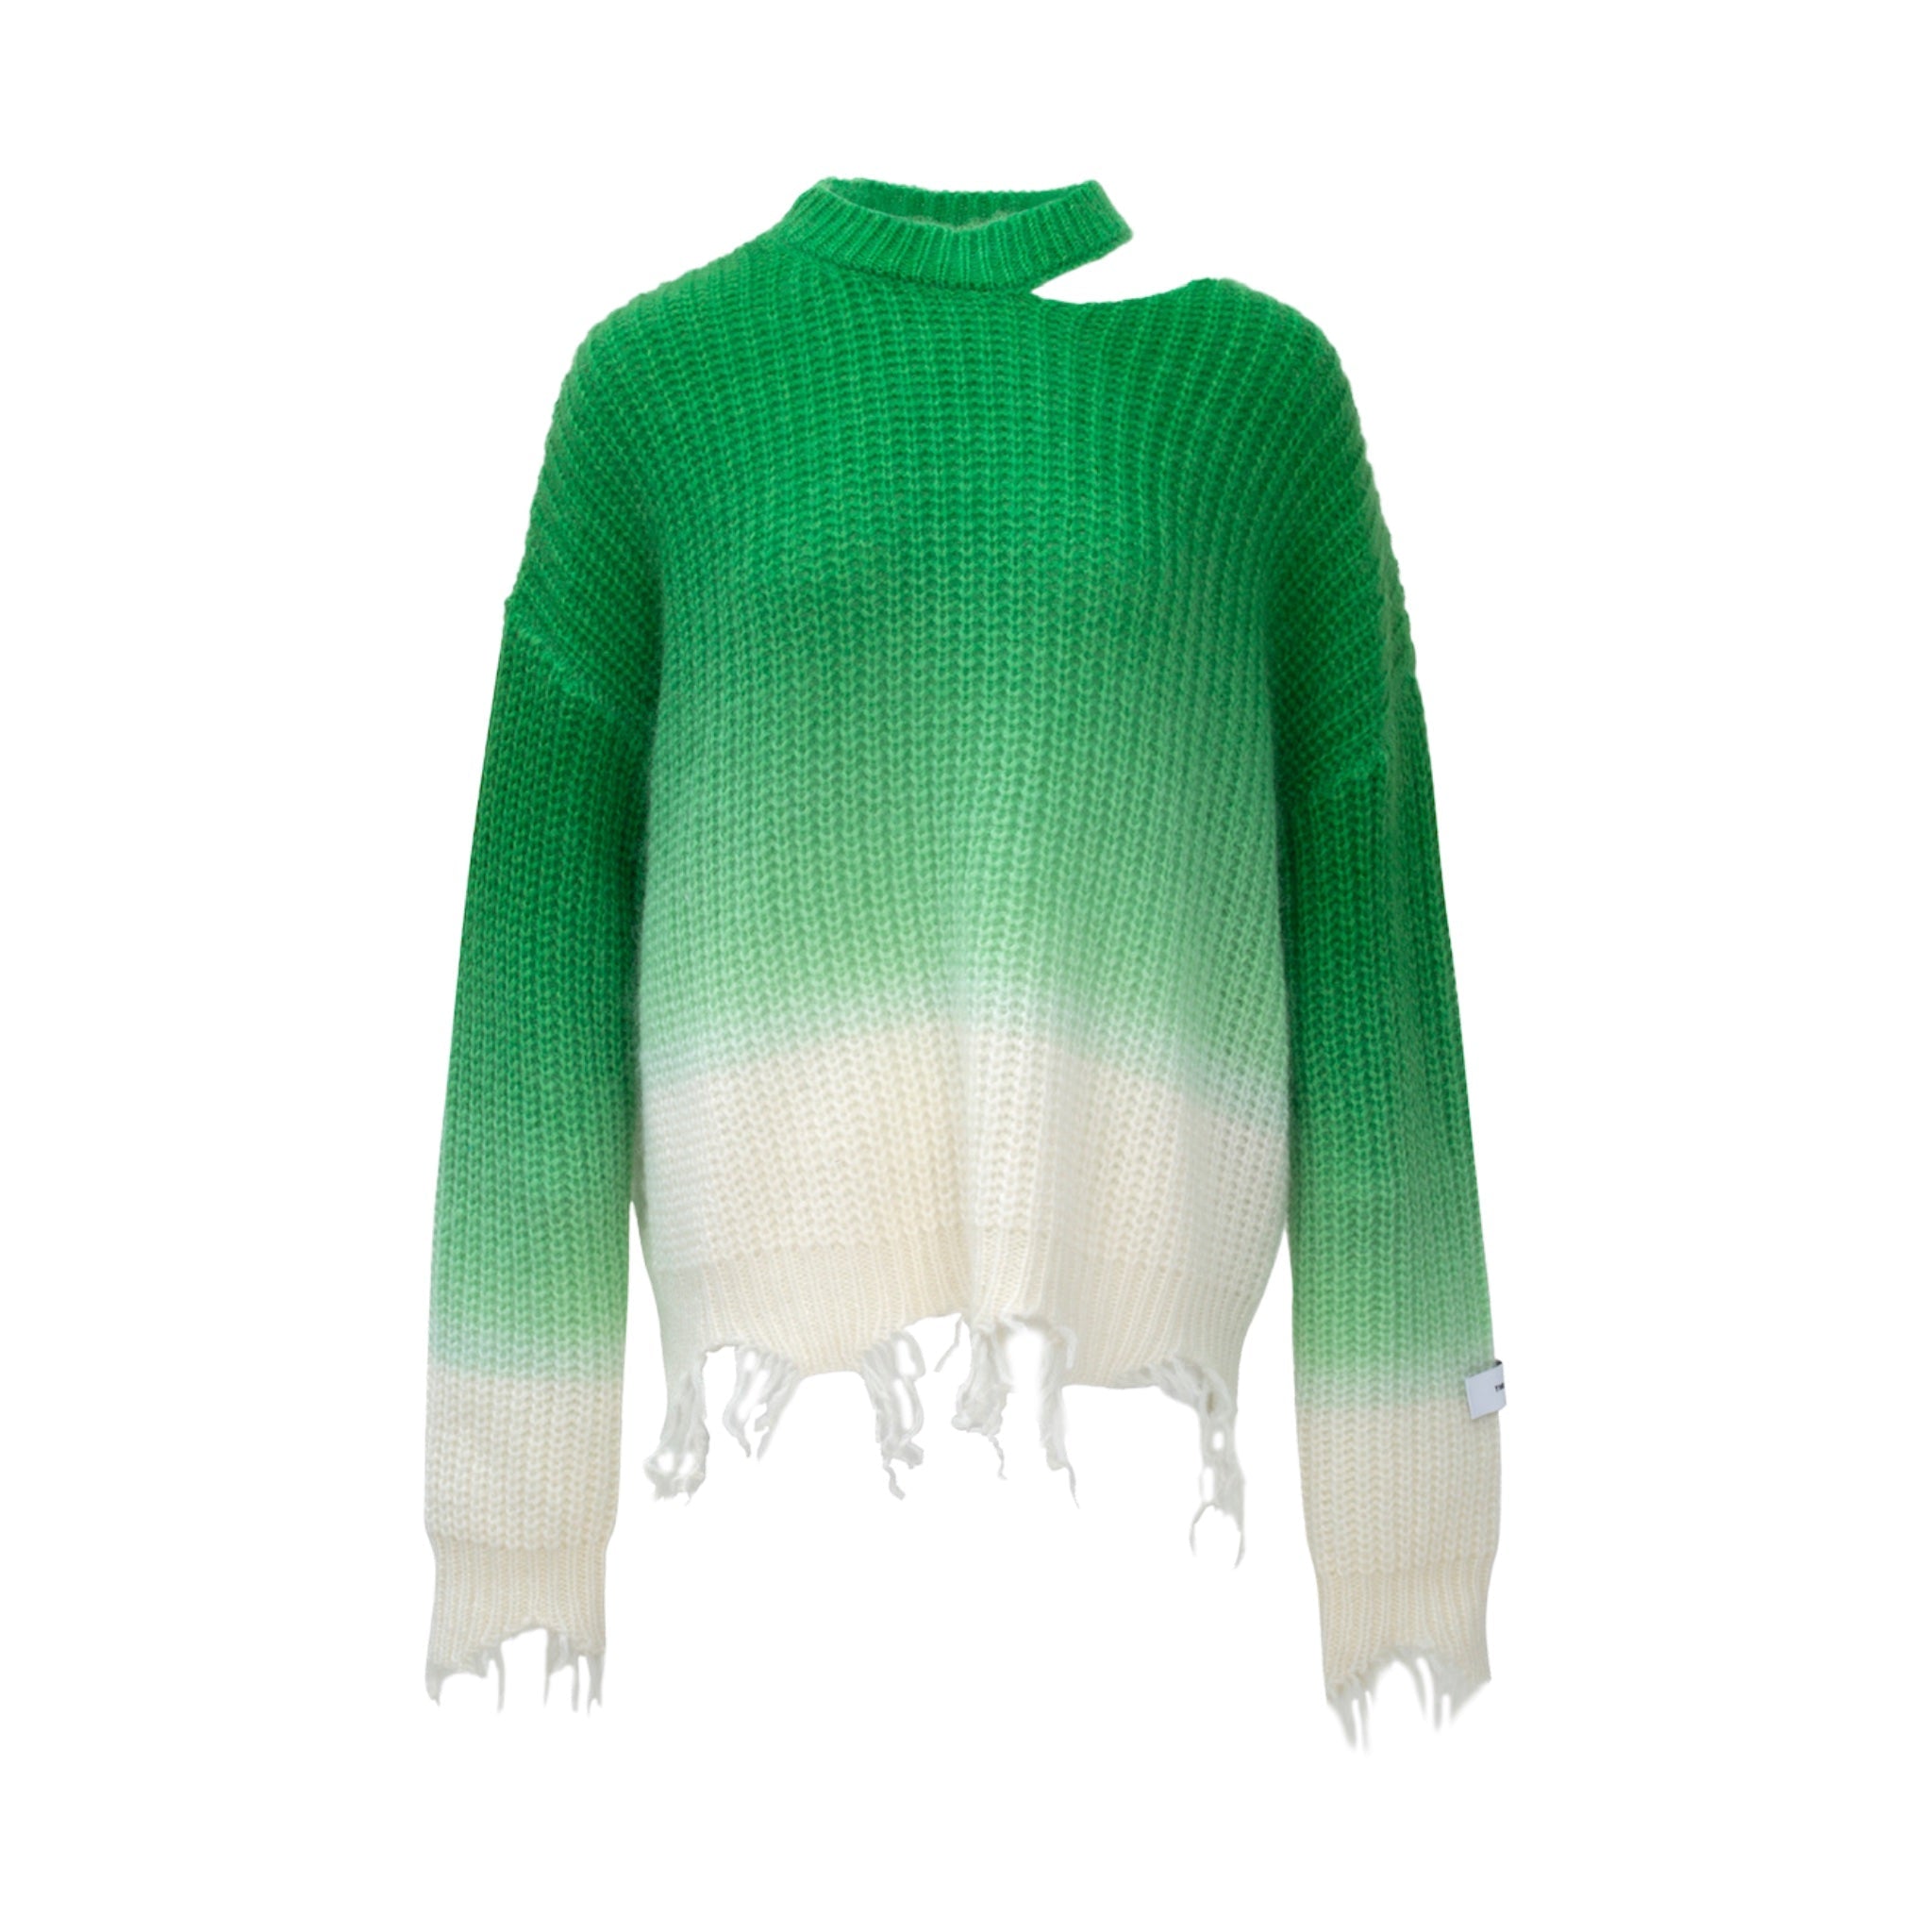 THE TEKKLA Green And White Gradient Destruction Sweater | MADA IN CHINA